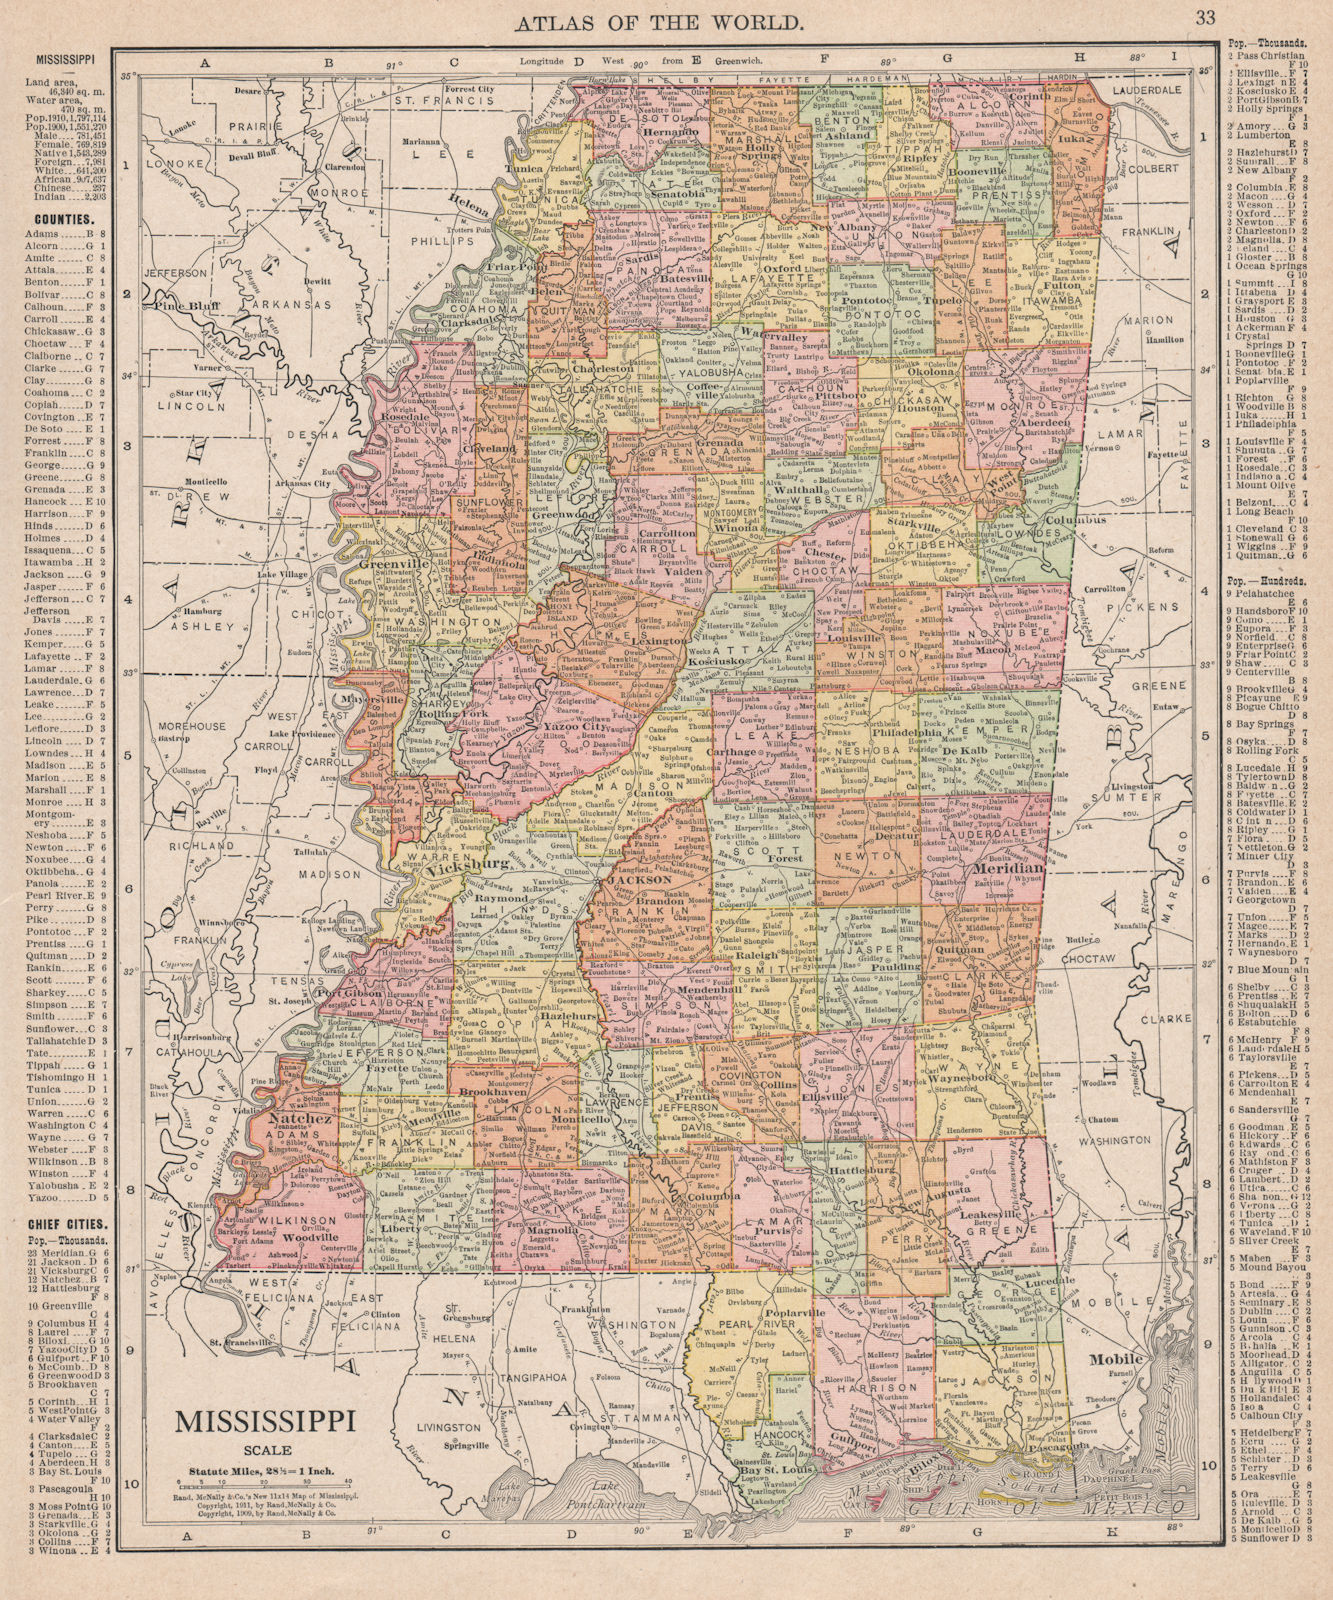 Mississippi state map showing counties. RAND MCNALLY 1912 old antique